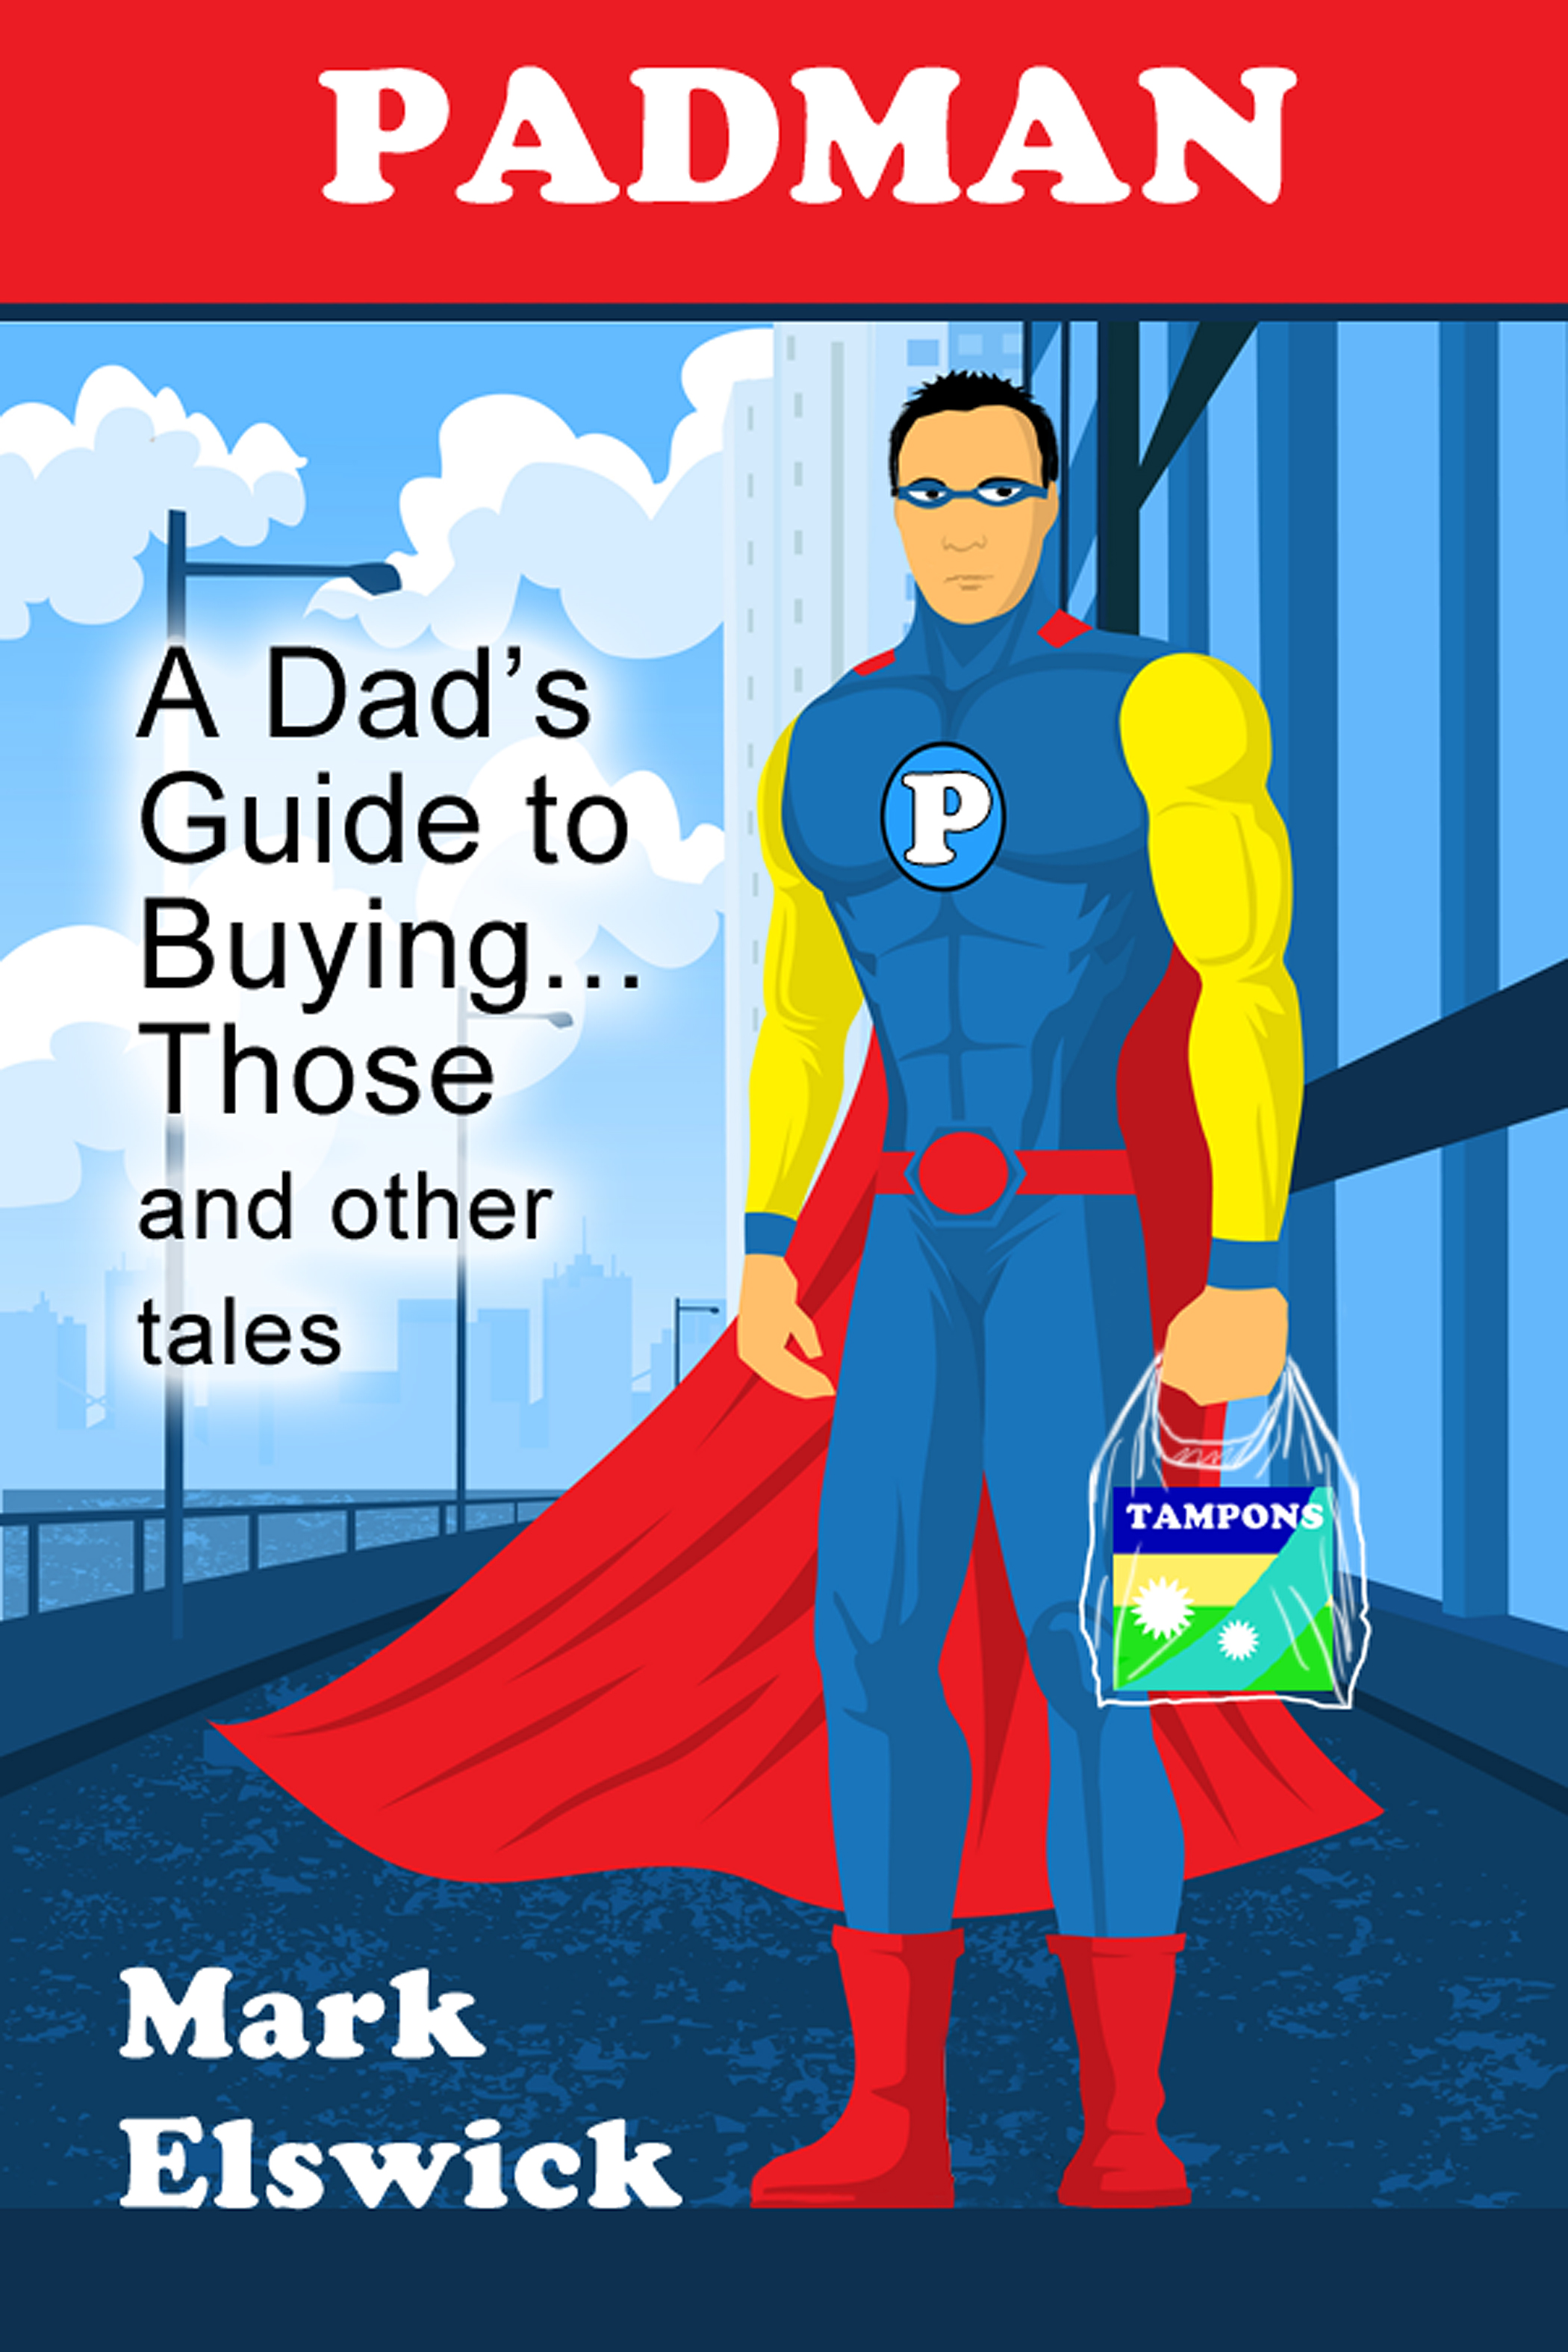 PADMAN: A Dad's Guide to Buying... Those and other tales